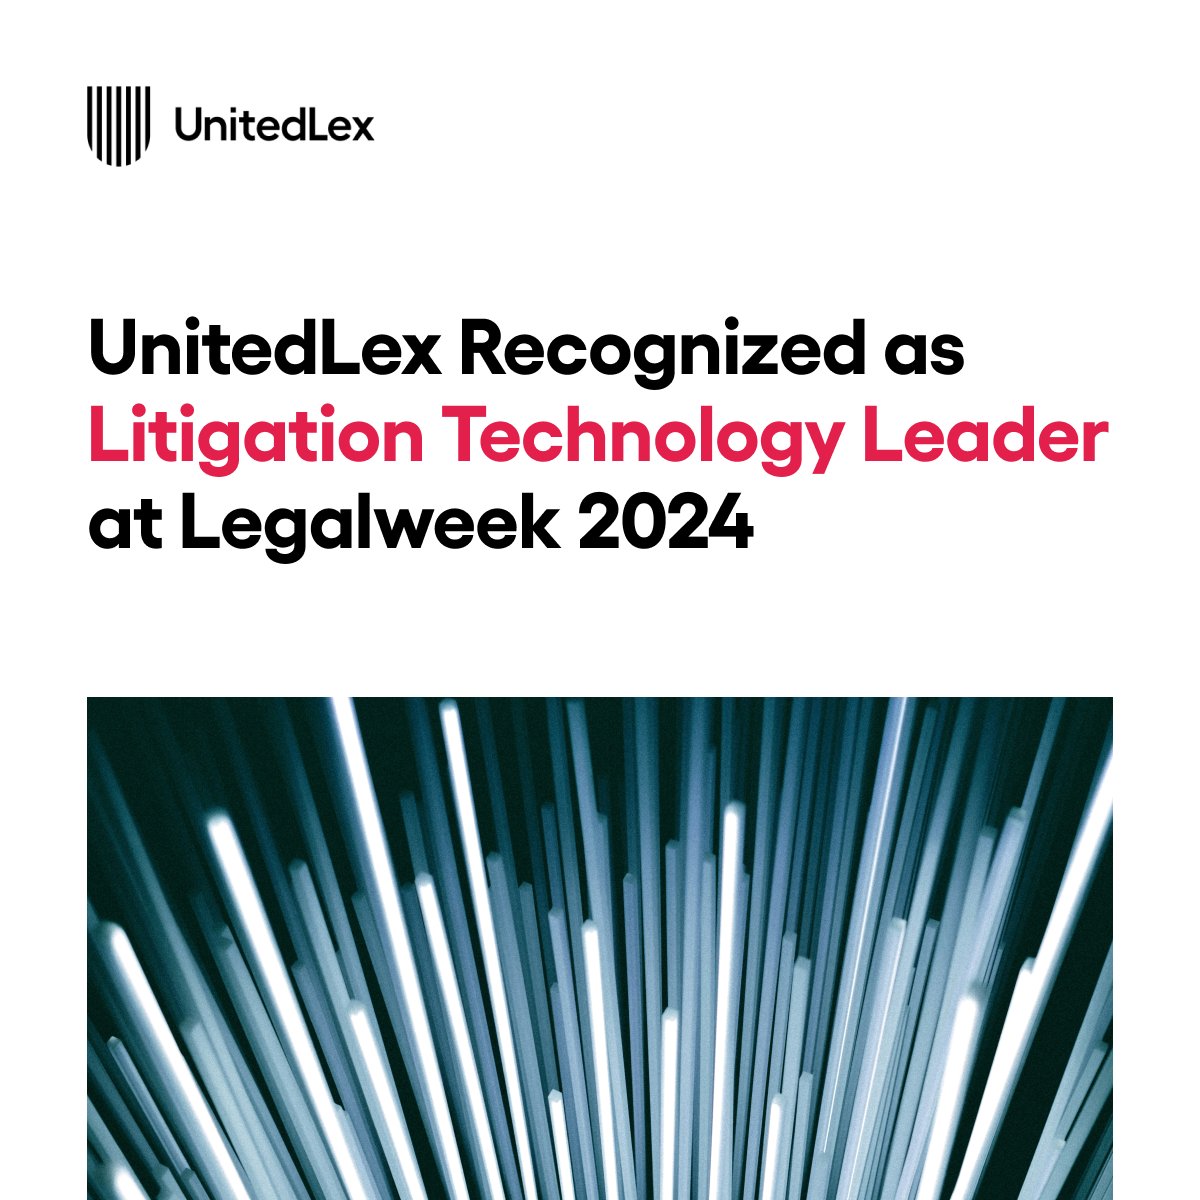 At Monday's Legalweek Leaders in Tech Law Awards, UnitedLex was selected as the winner in the Litigation Technology category. Learn more in today's press release: hubs.li/Q02jk8180 #VIR #legaltech #legalweek2024 #ULXforthewin #litigation #discovery